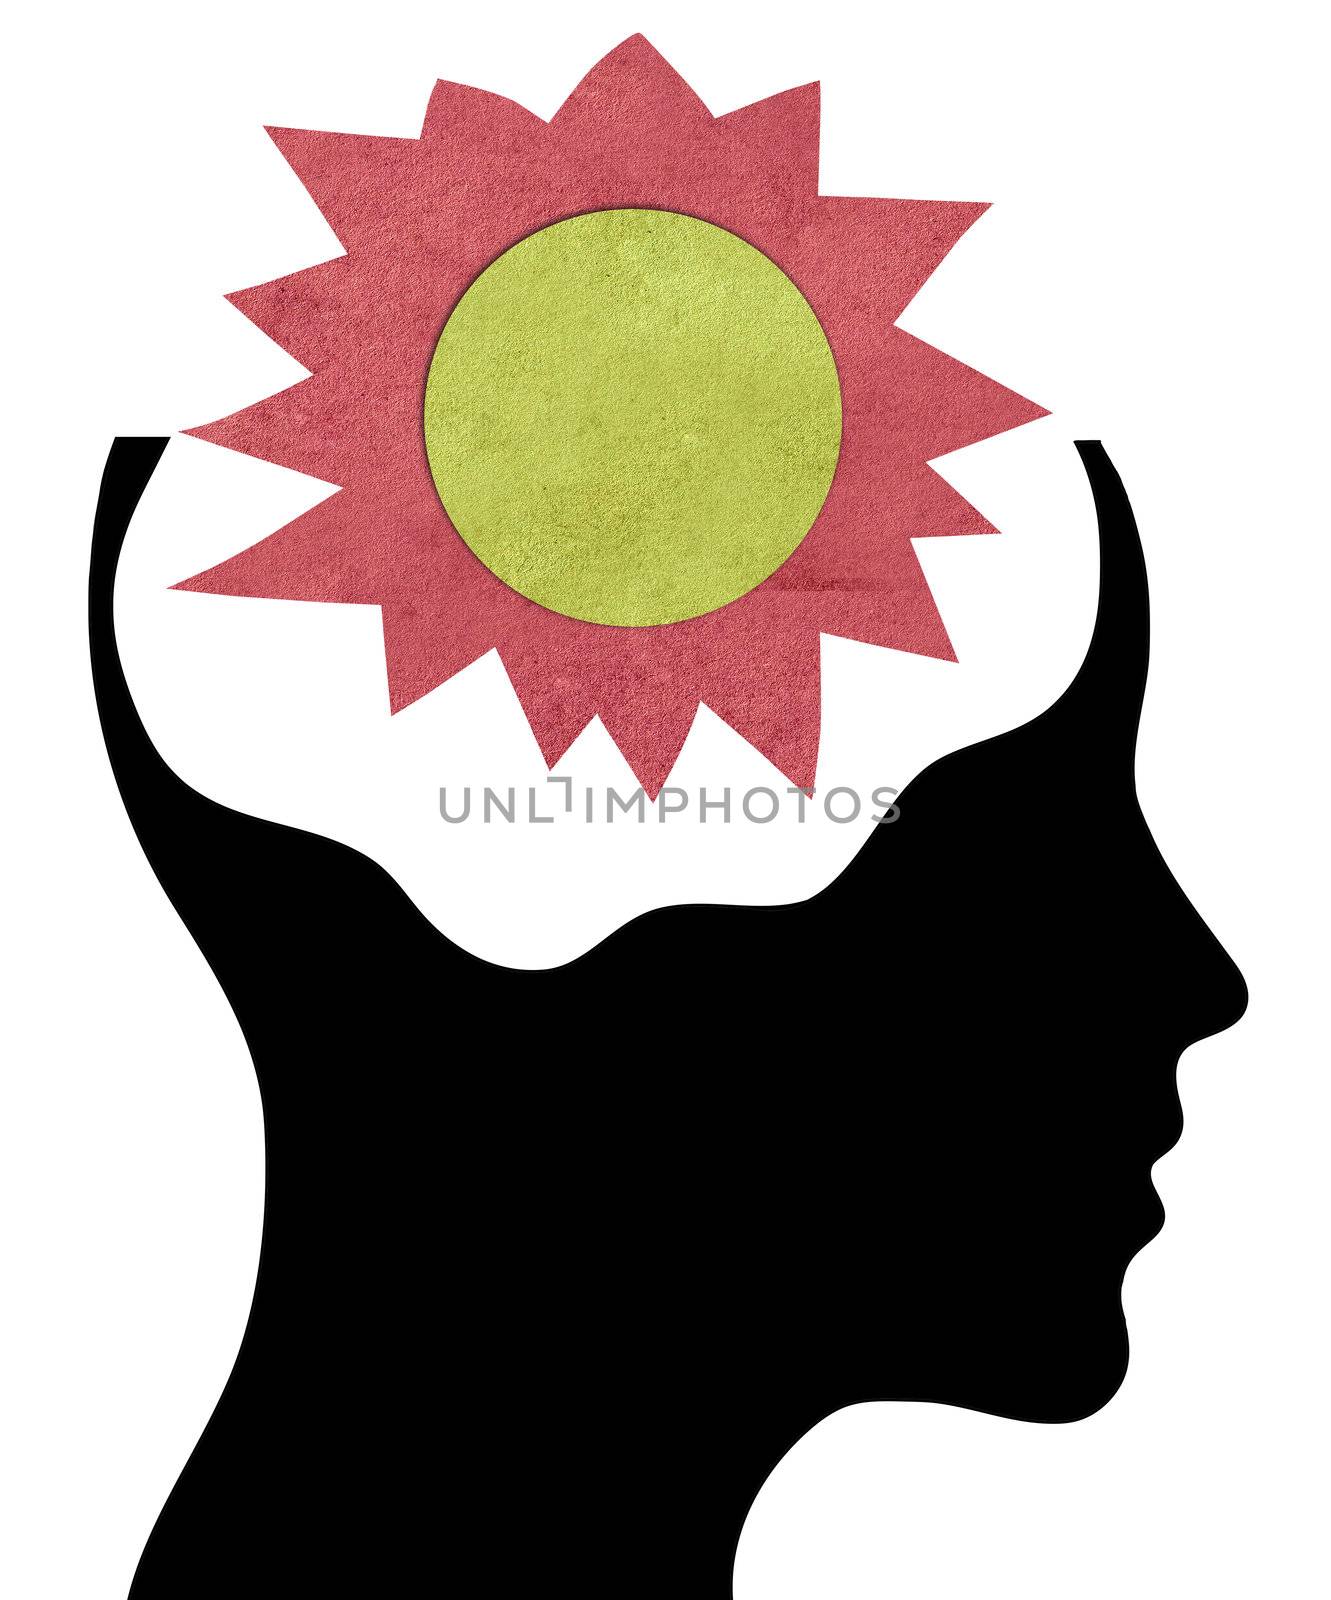 Human head silhouette with paper sun on the brain by rufous